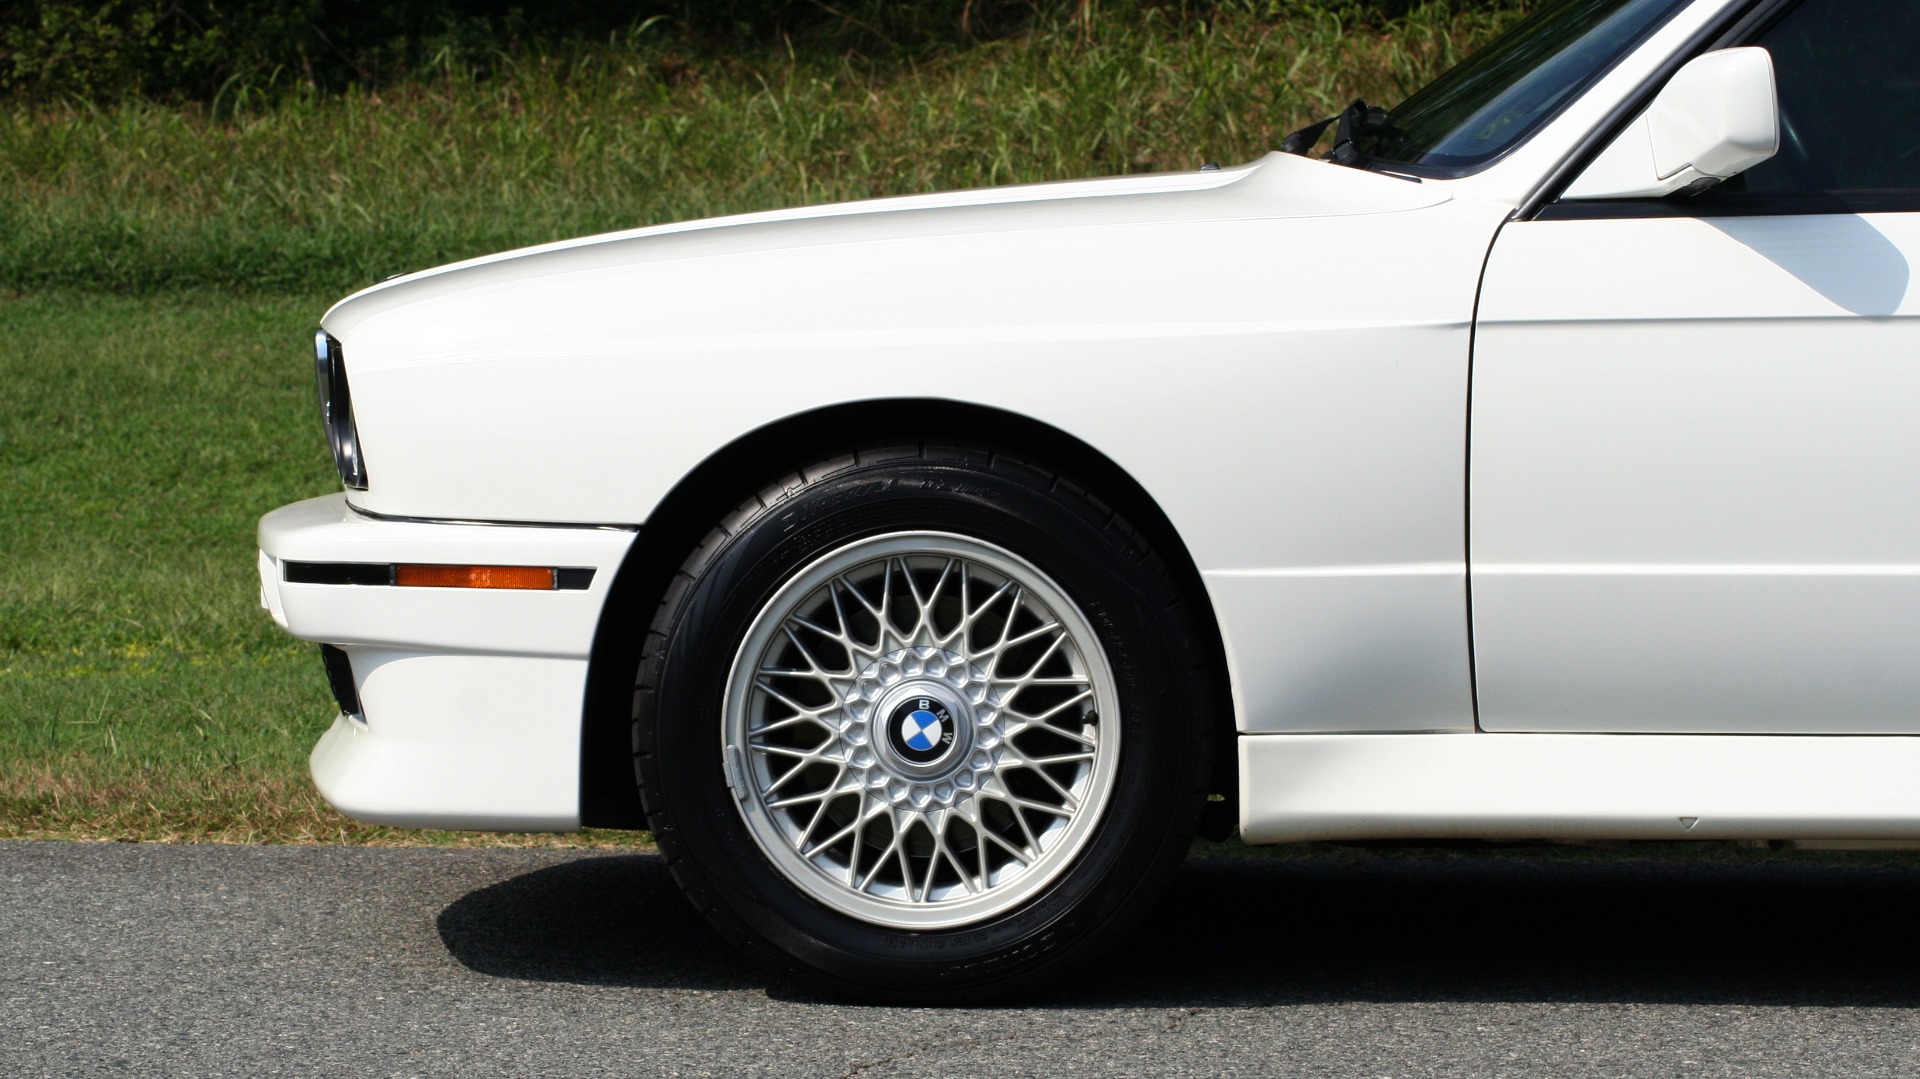 Used 1989 BMW M3 COUPE 2DR / 5-SPEED MAN / LOW MILES / SUPER CLEAN for sale Sold at Formula Imports in Charlotte NC 28227 5